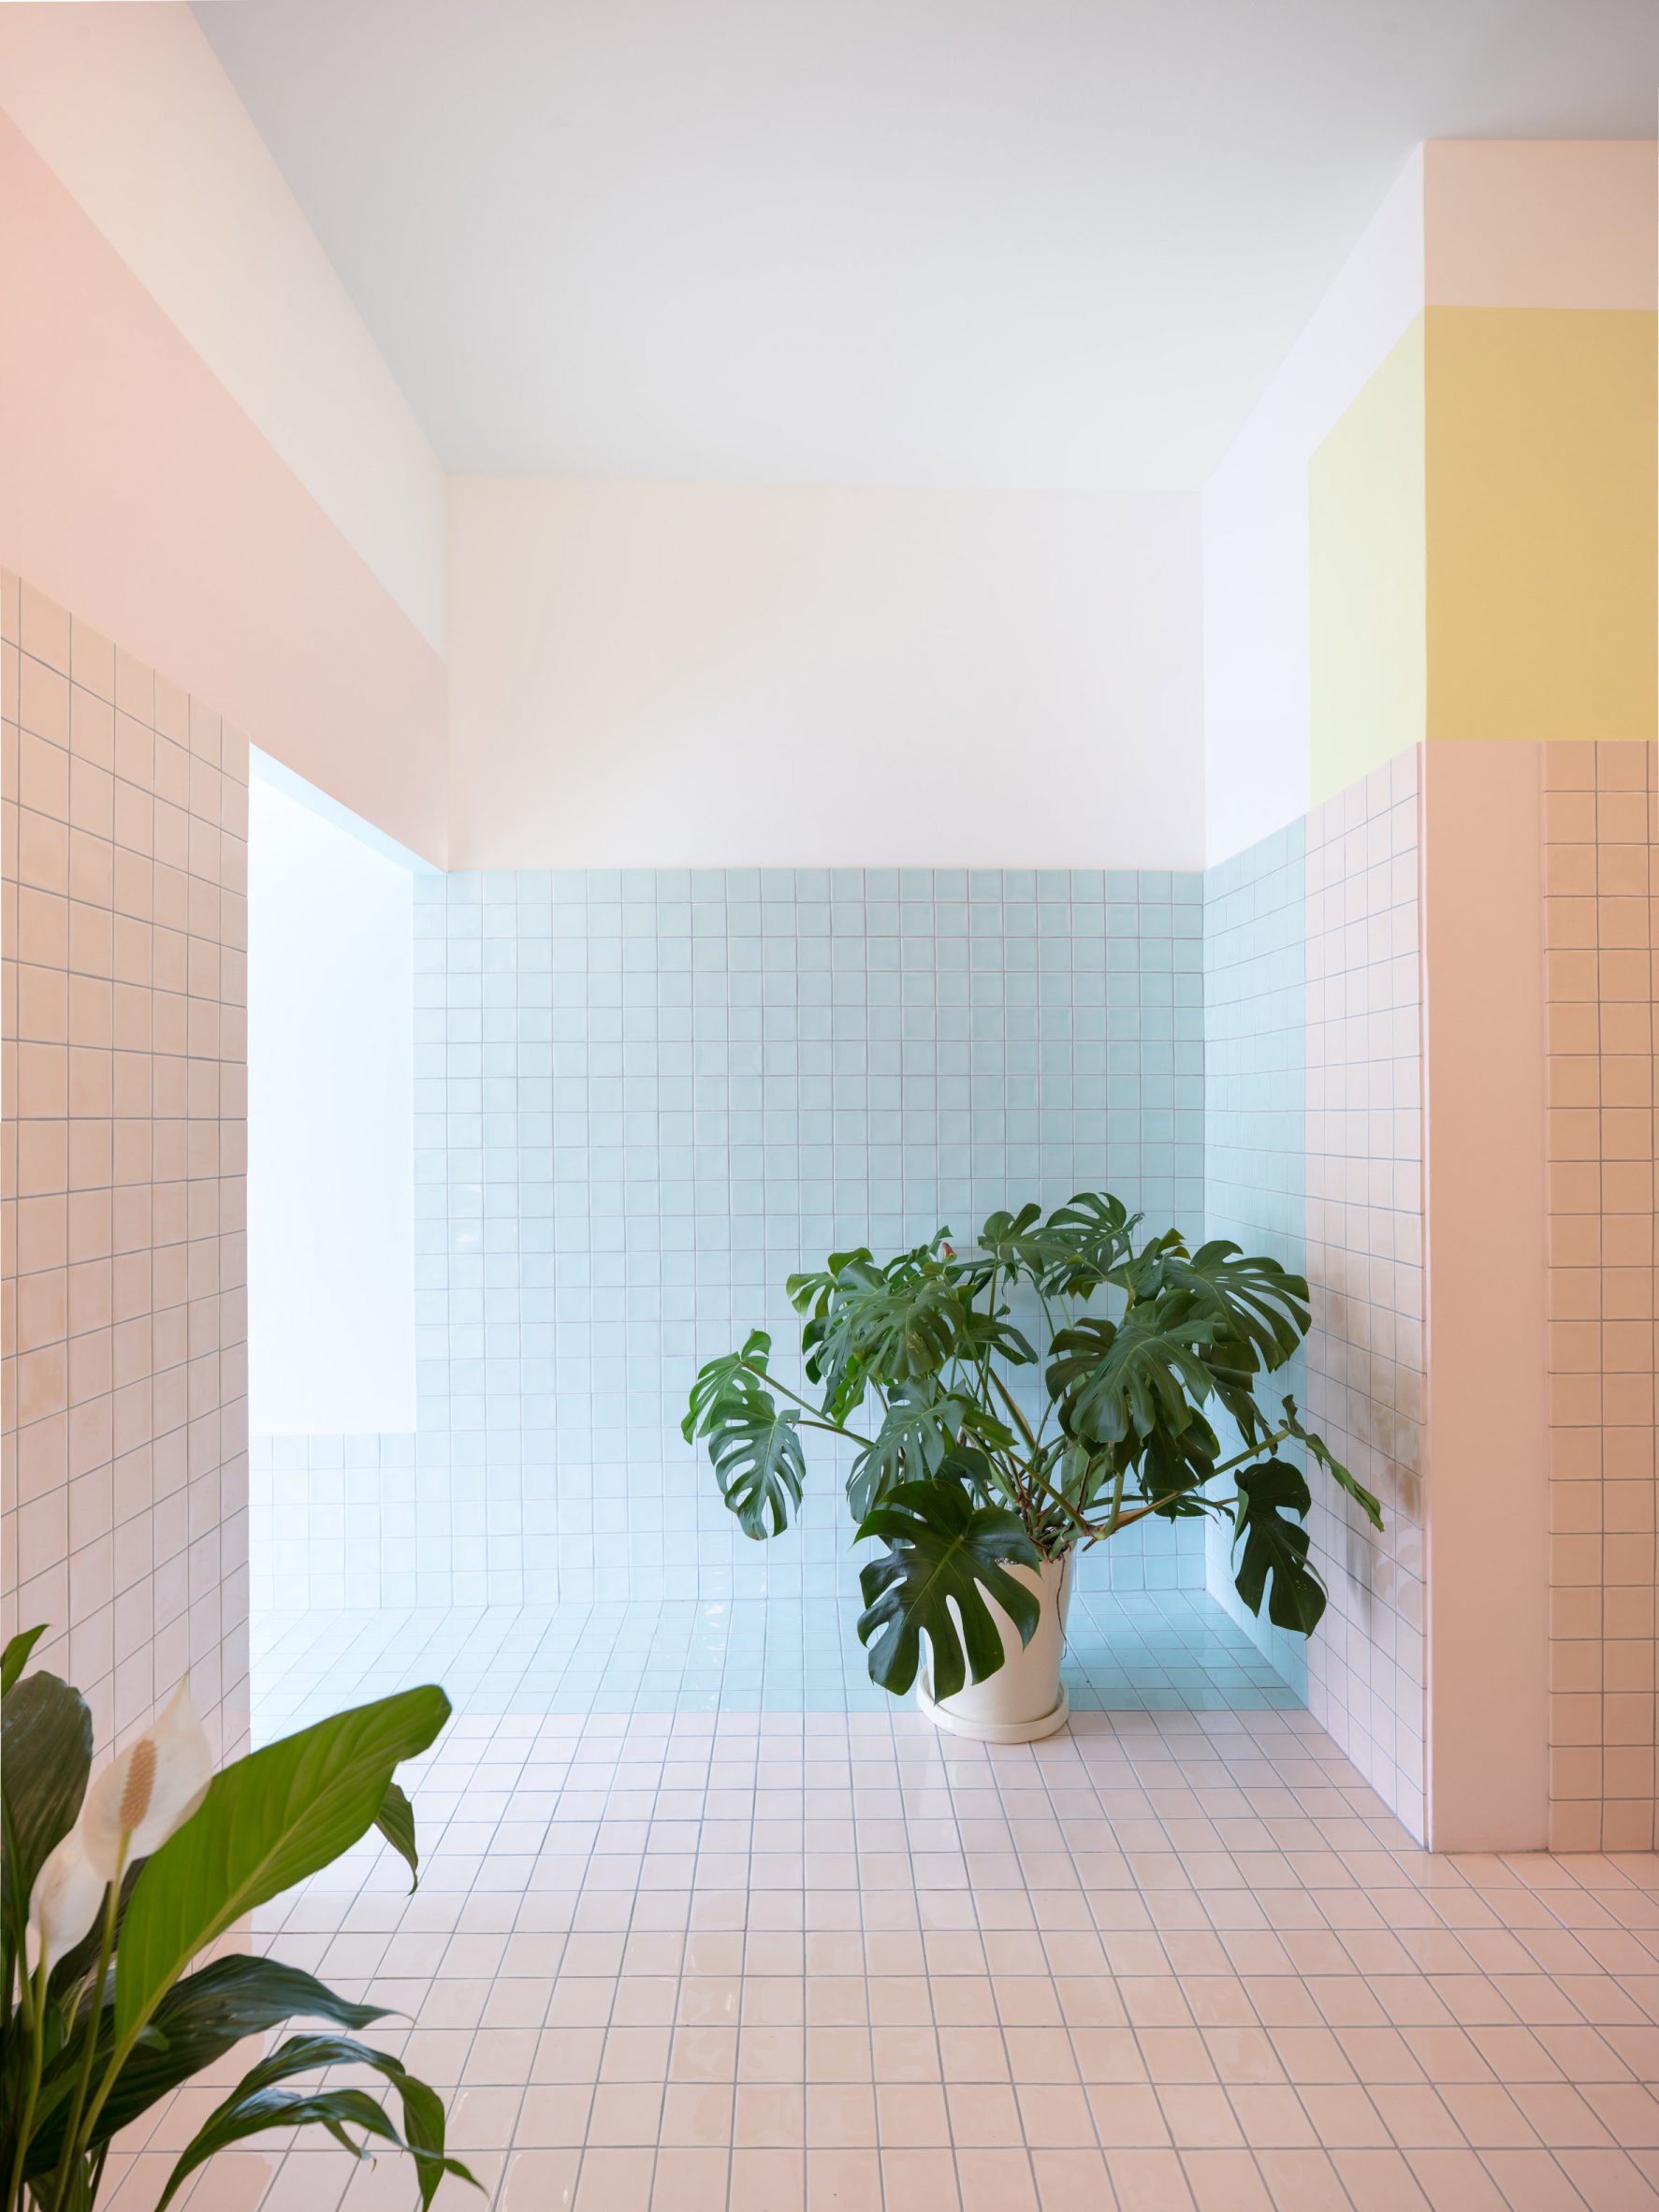 Walls with pastel-coloured tiles and cheese plant in spa interior by Bureau